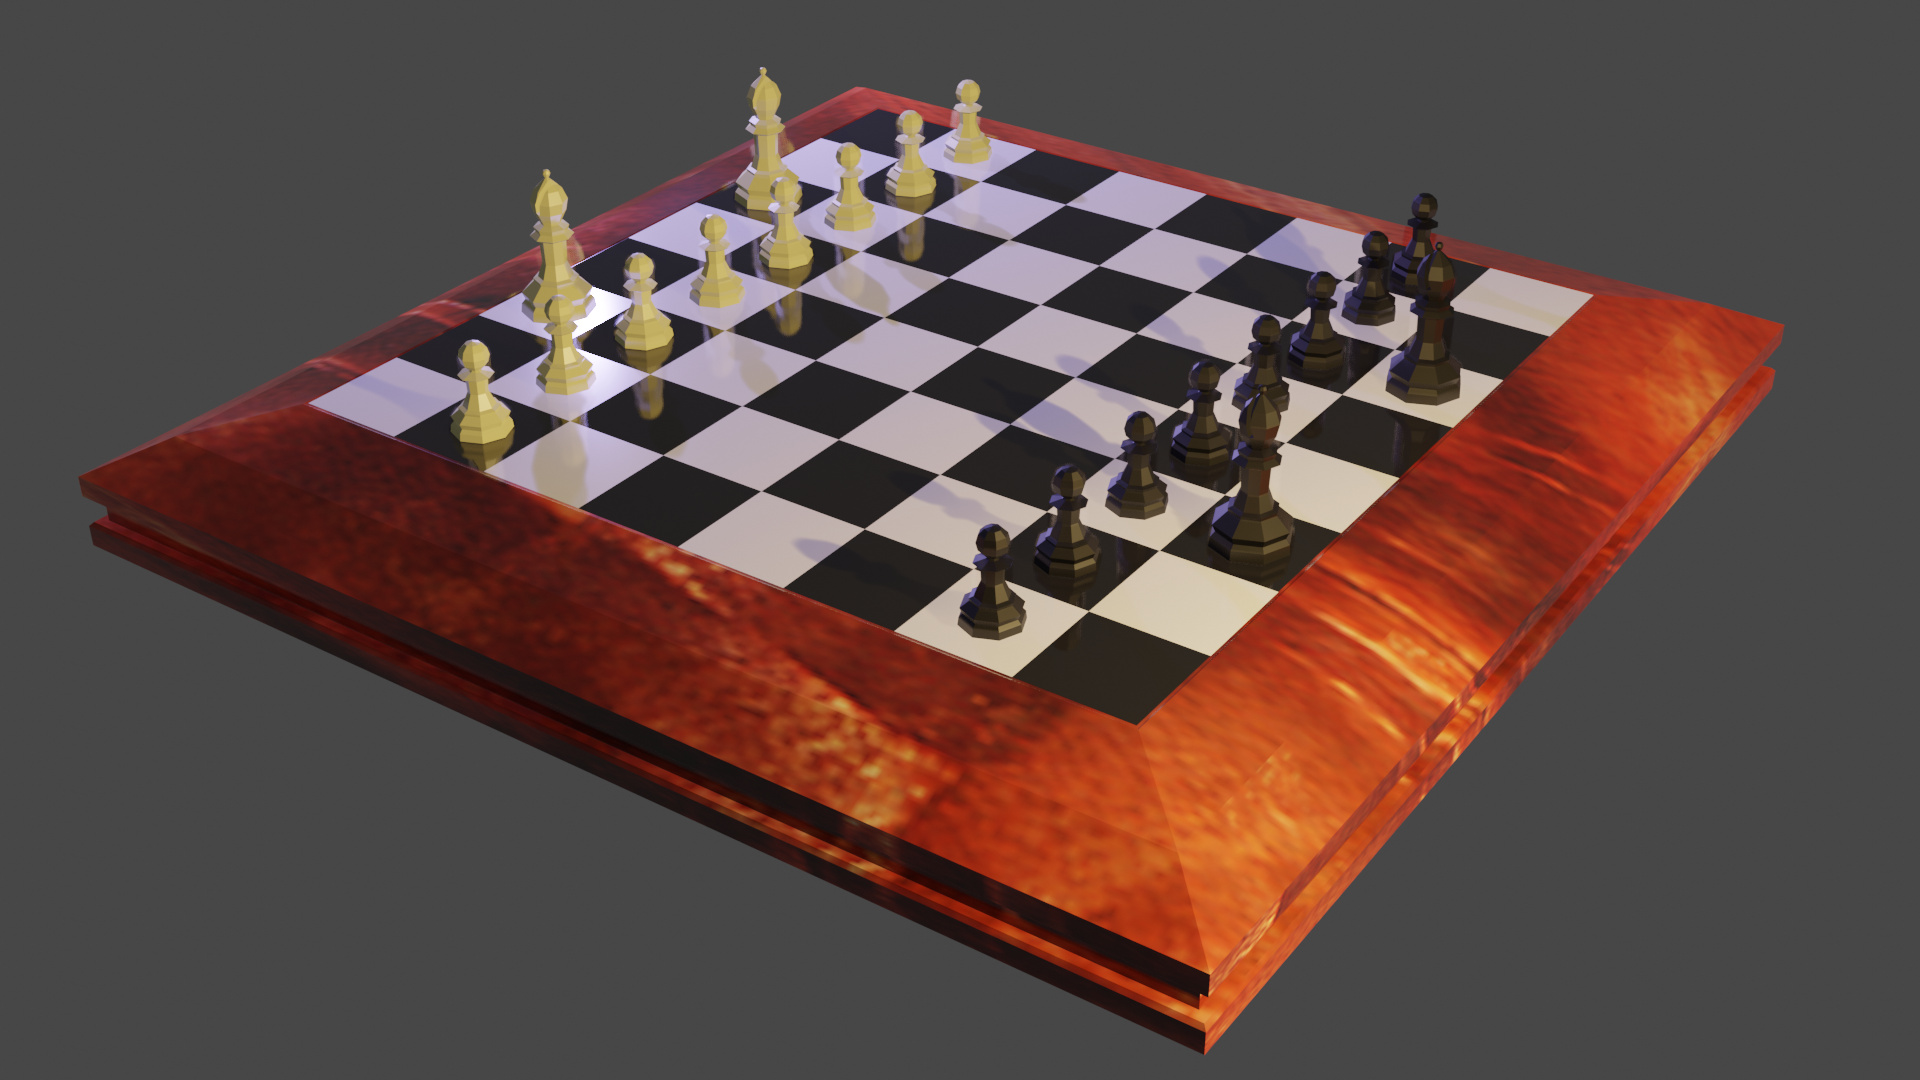 %20Introduction%20To%20The%20Mapping%20Node%20-%20Chess%20Board%20-%20WITH%20PIECES-2